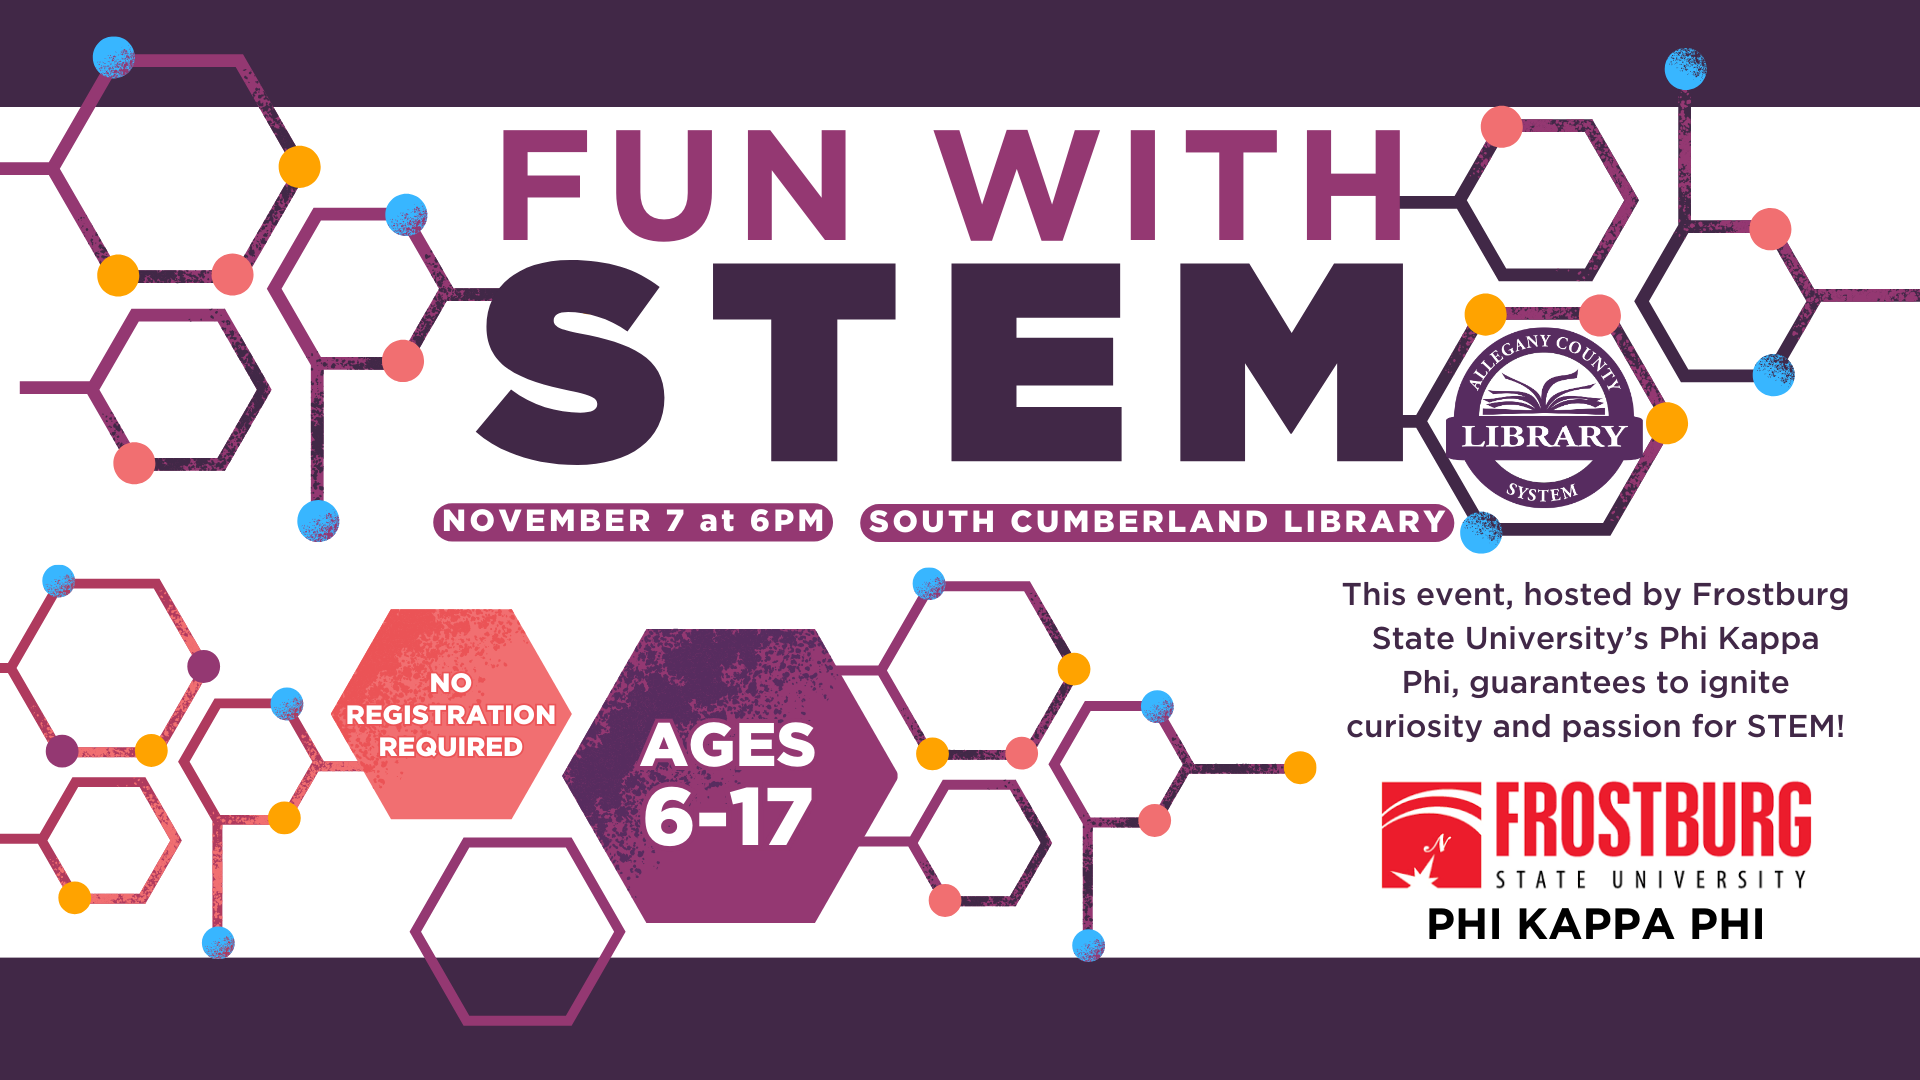 Fun with STEM event details